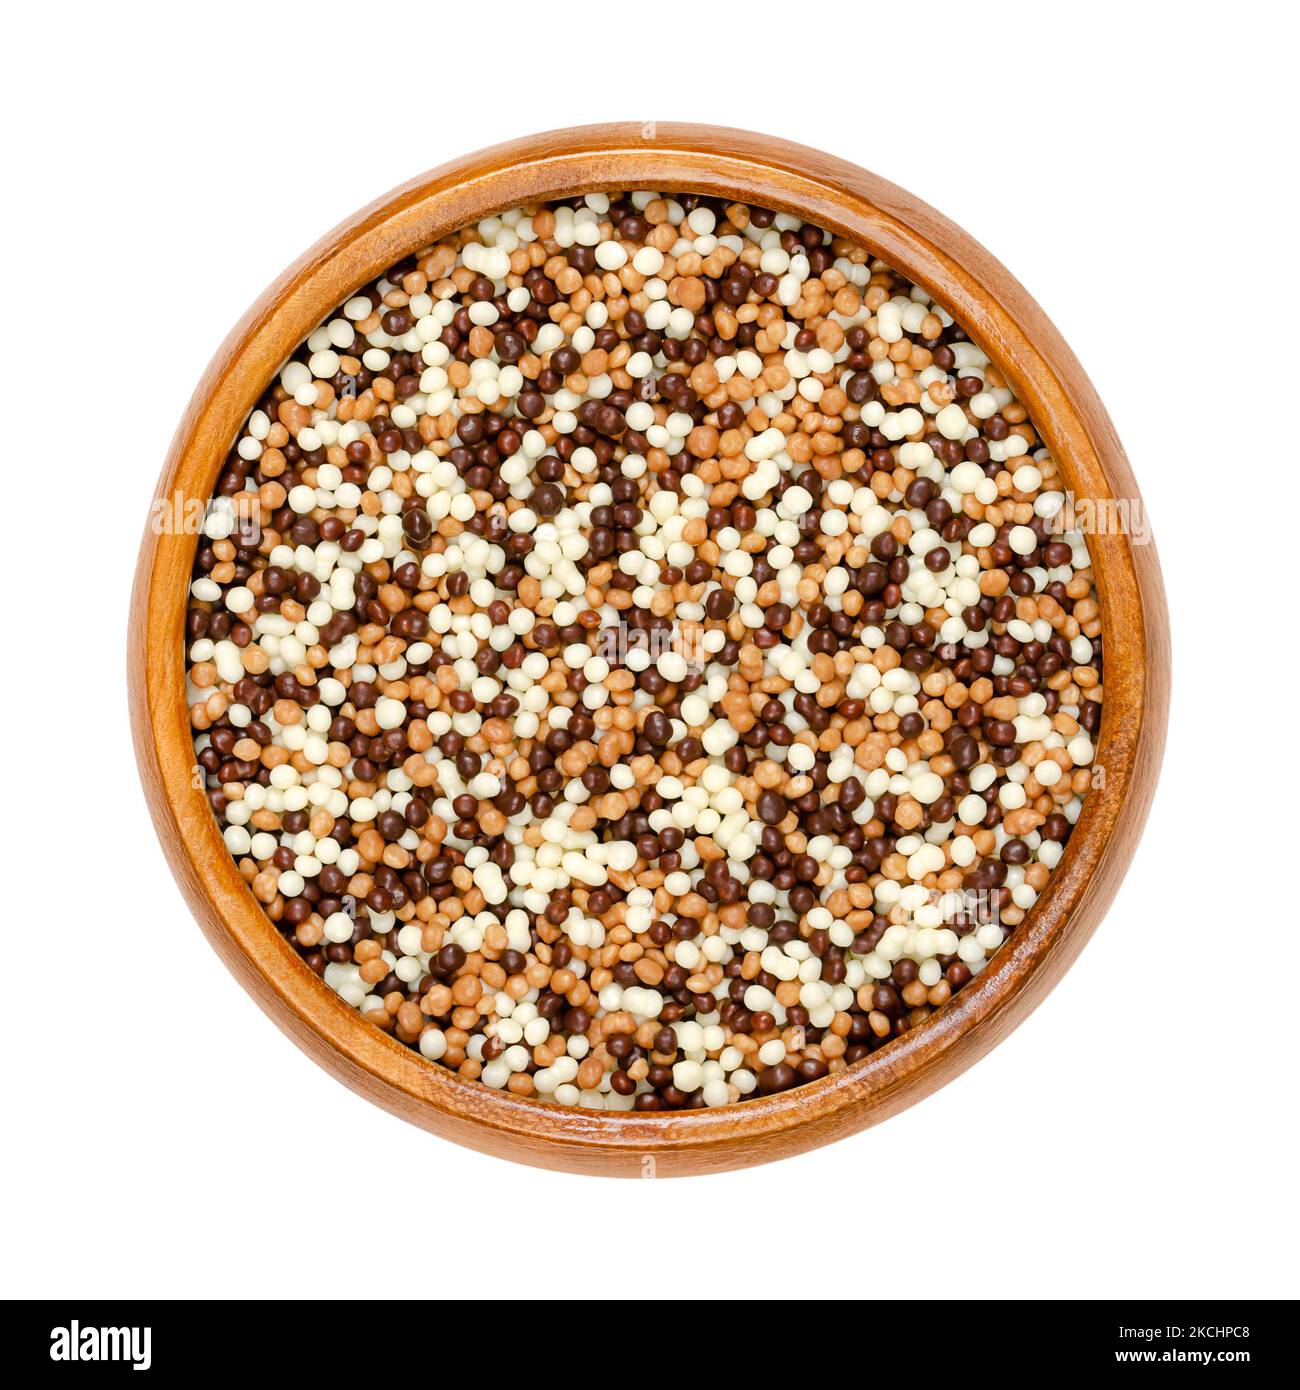 Mini chocolate crispy pearls mix, in a wooden bowl. Sweet crunchy cereal extrudate with a coating of dark, milk and white chocolate. Decoration. Stock Photo